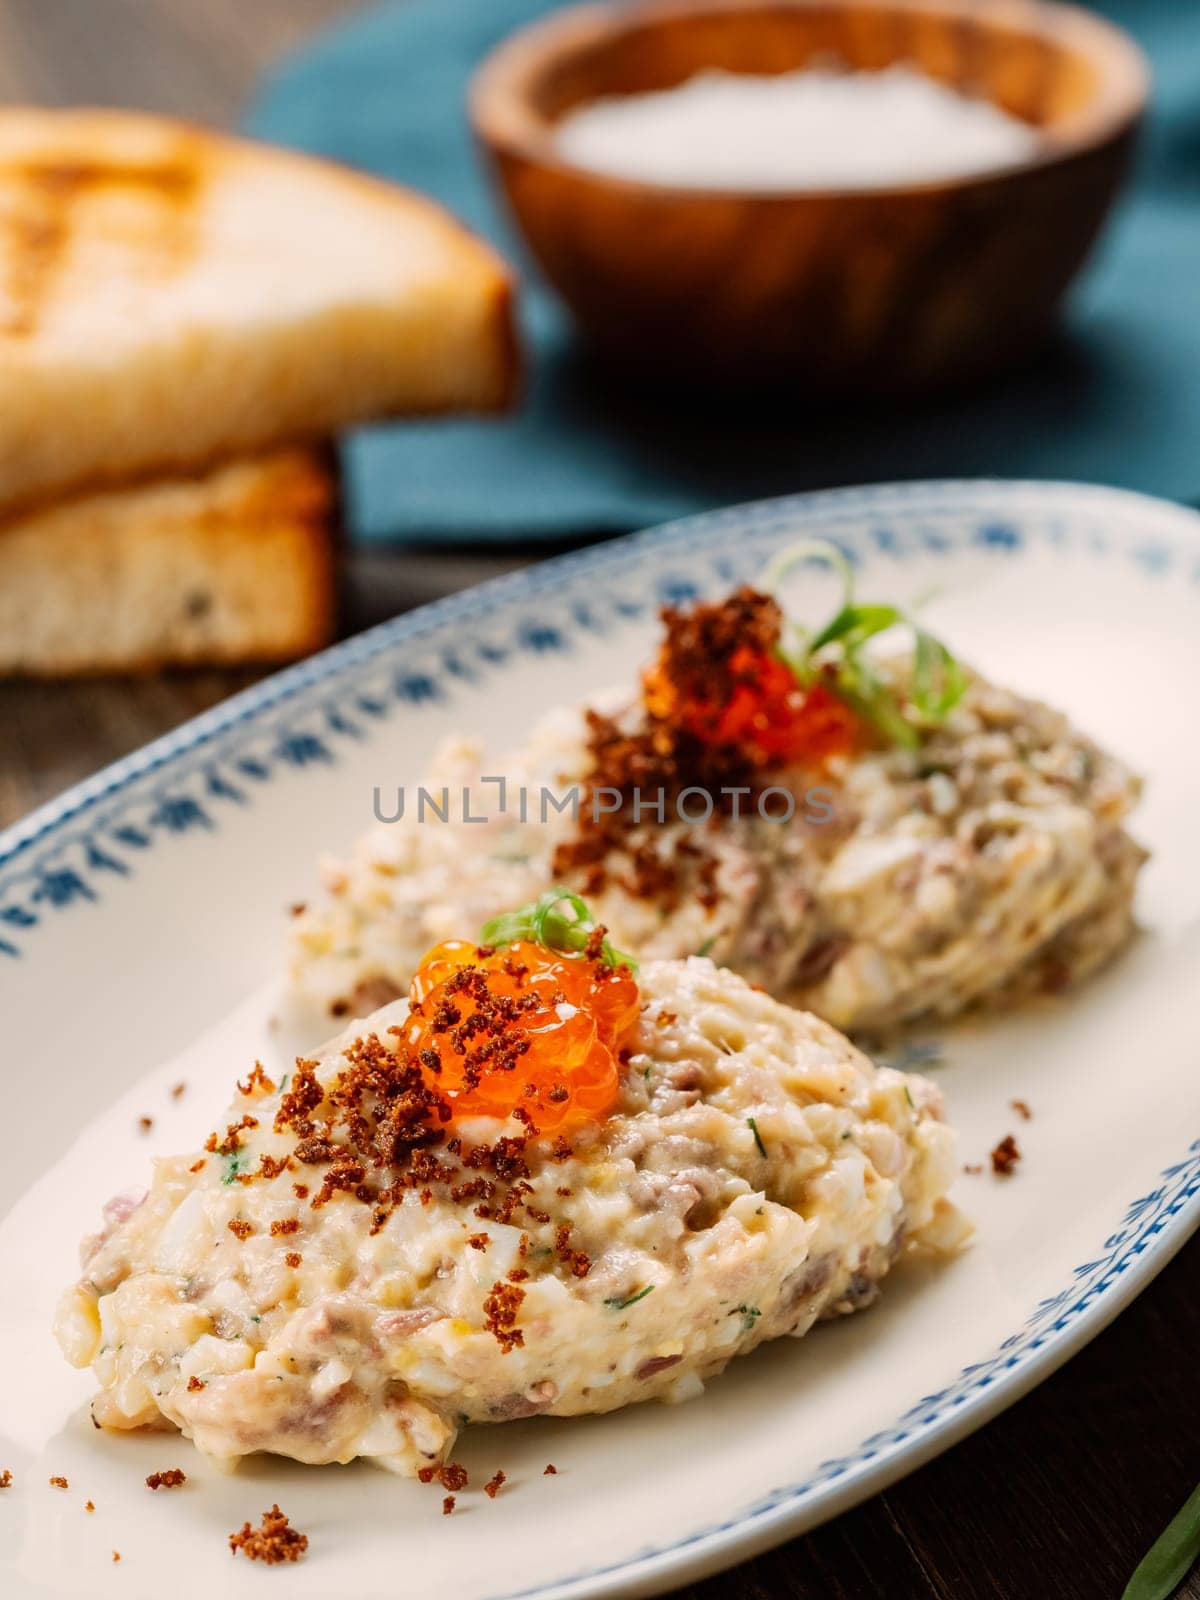 Fish appetizer forshmak - minced meat from herring fish, decorated caviar on plate. Traditional Jewish cuisine dish vorschmack forshmak made of herring fillet as independent dish on wooden background